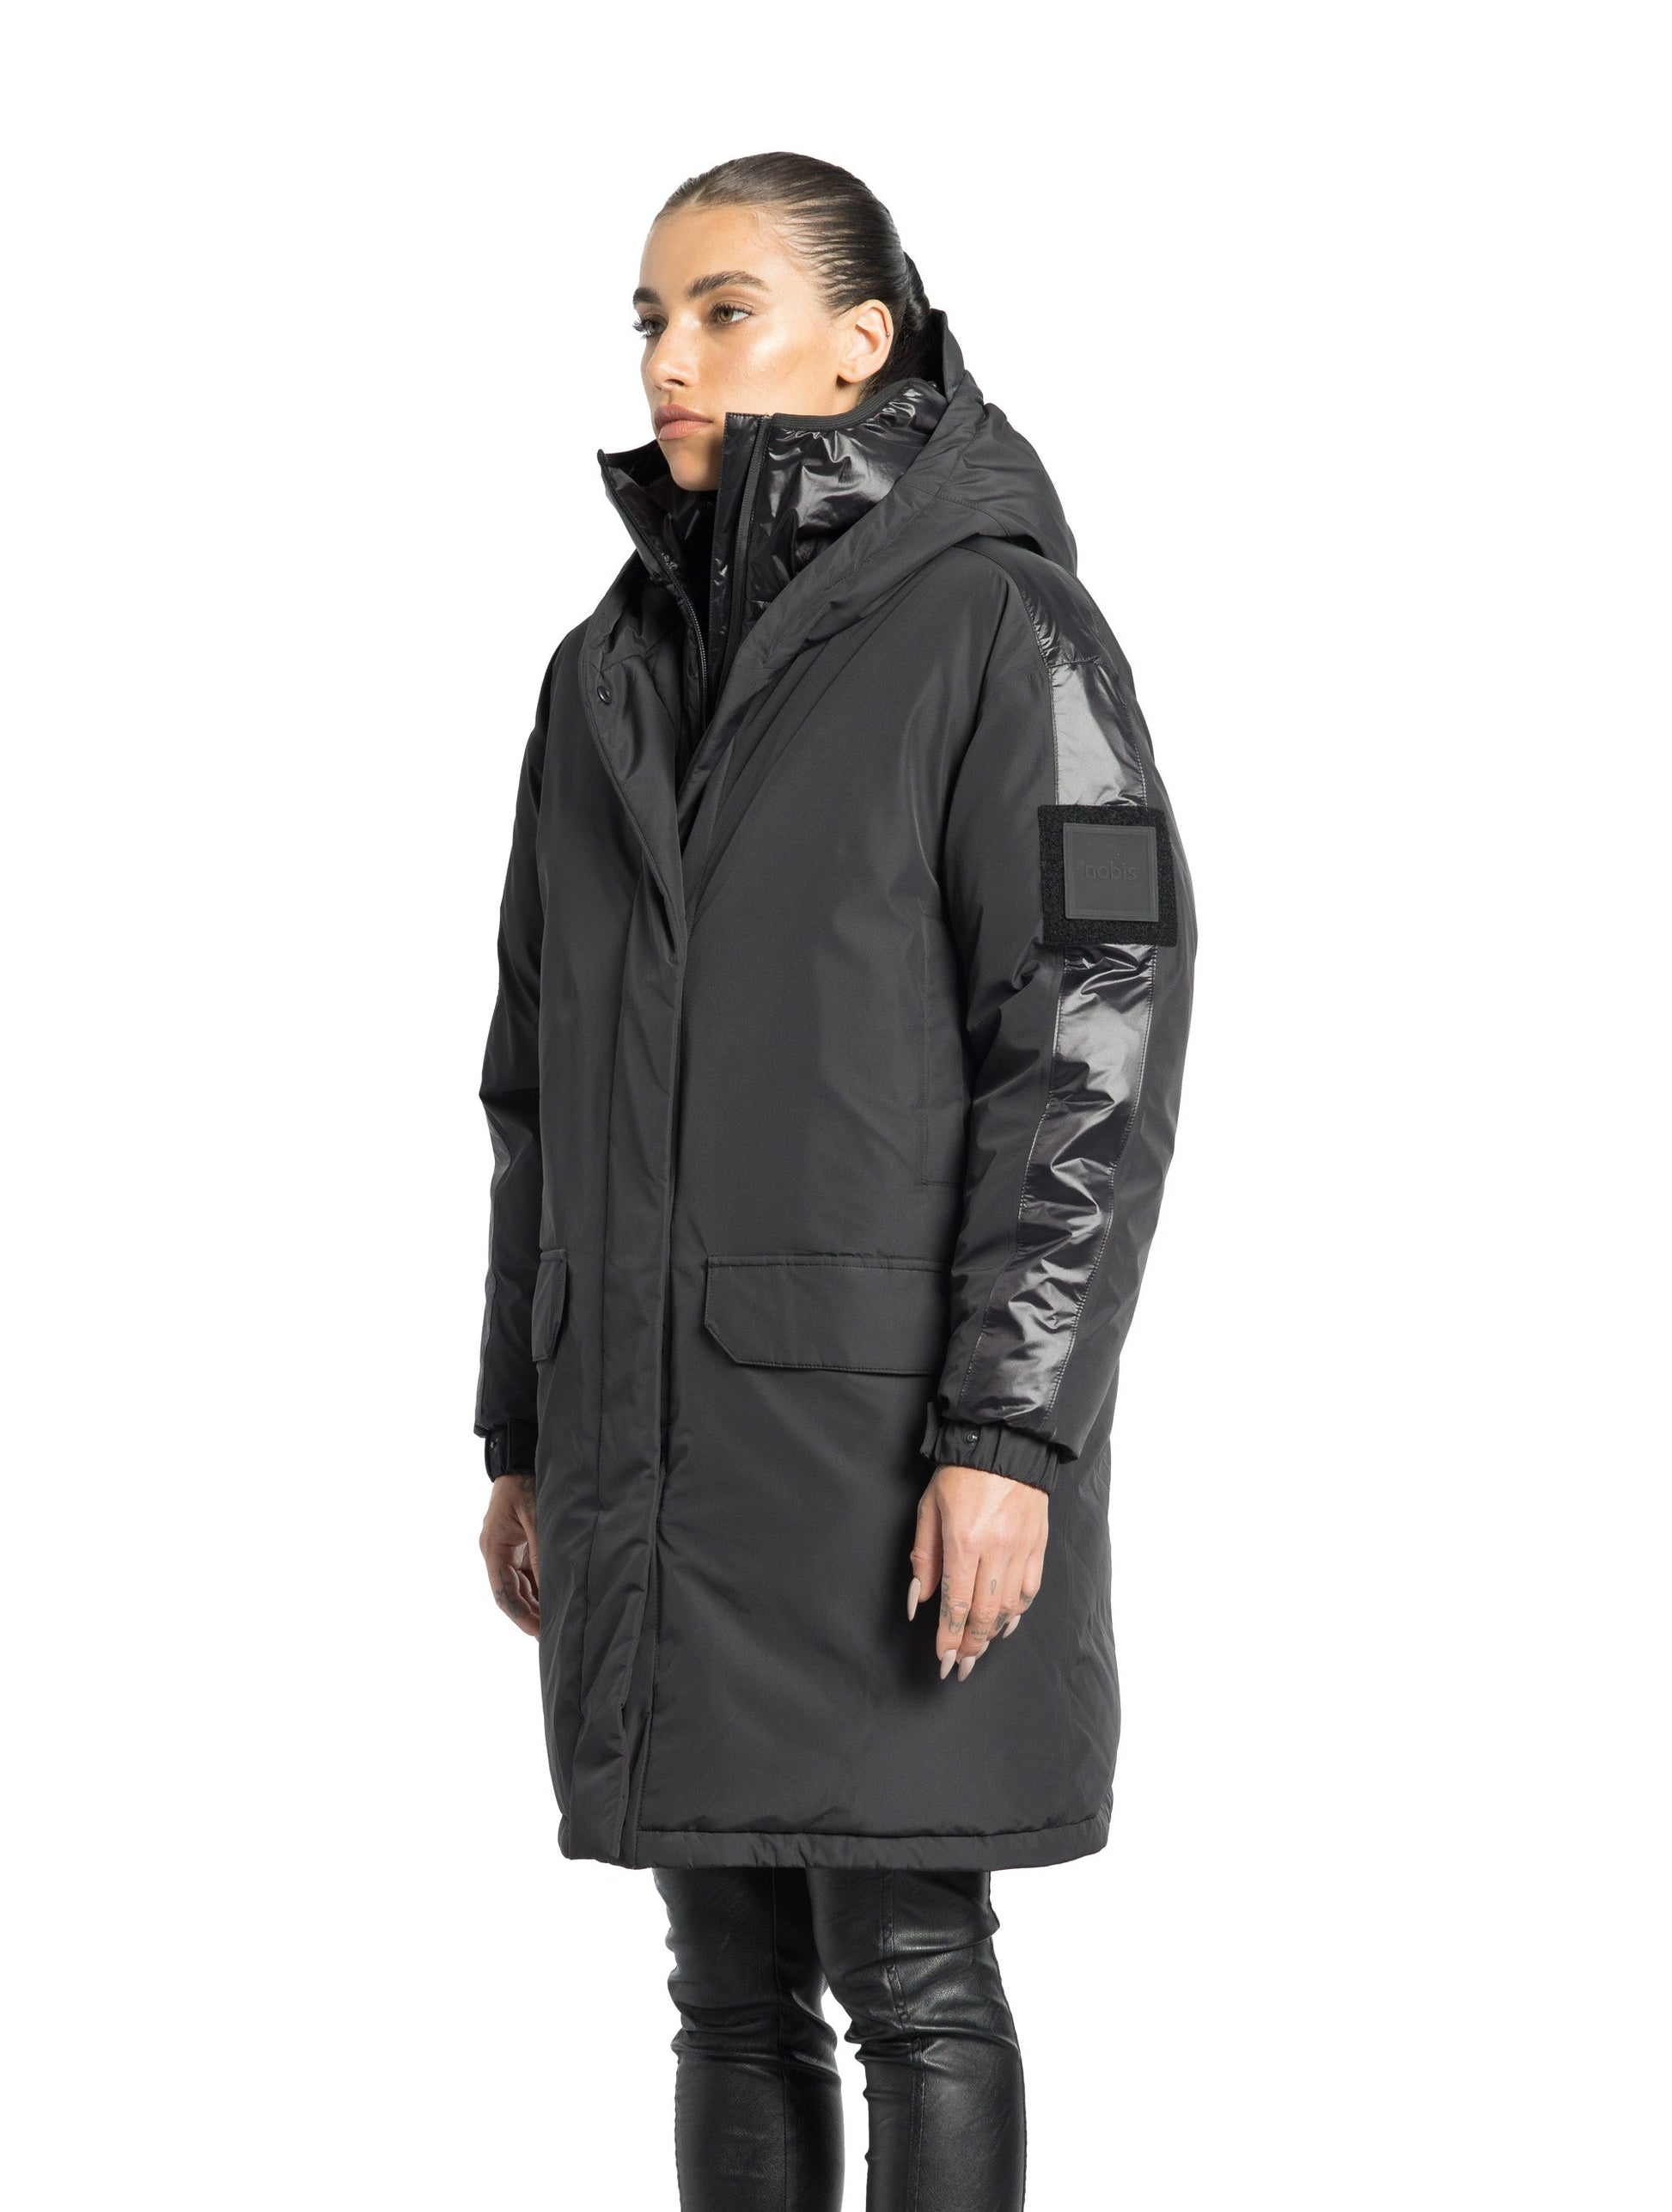 Slyn Women's Performance Parka in thigh length, premium 3-ply micro denier and cire technical nylon taffeta fabrication, Premium Canadian origin White Duck Down insulation, non-removable down-filled hood, inner hooded gilet, two-way centre-front zipper with magnetic closure wind flap, fleece-lined pockets at chest and waist, pit zipper vents, in Black